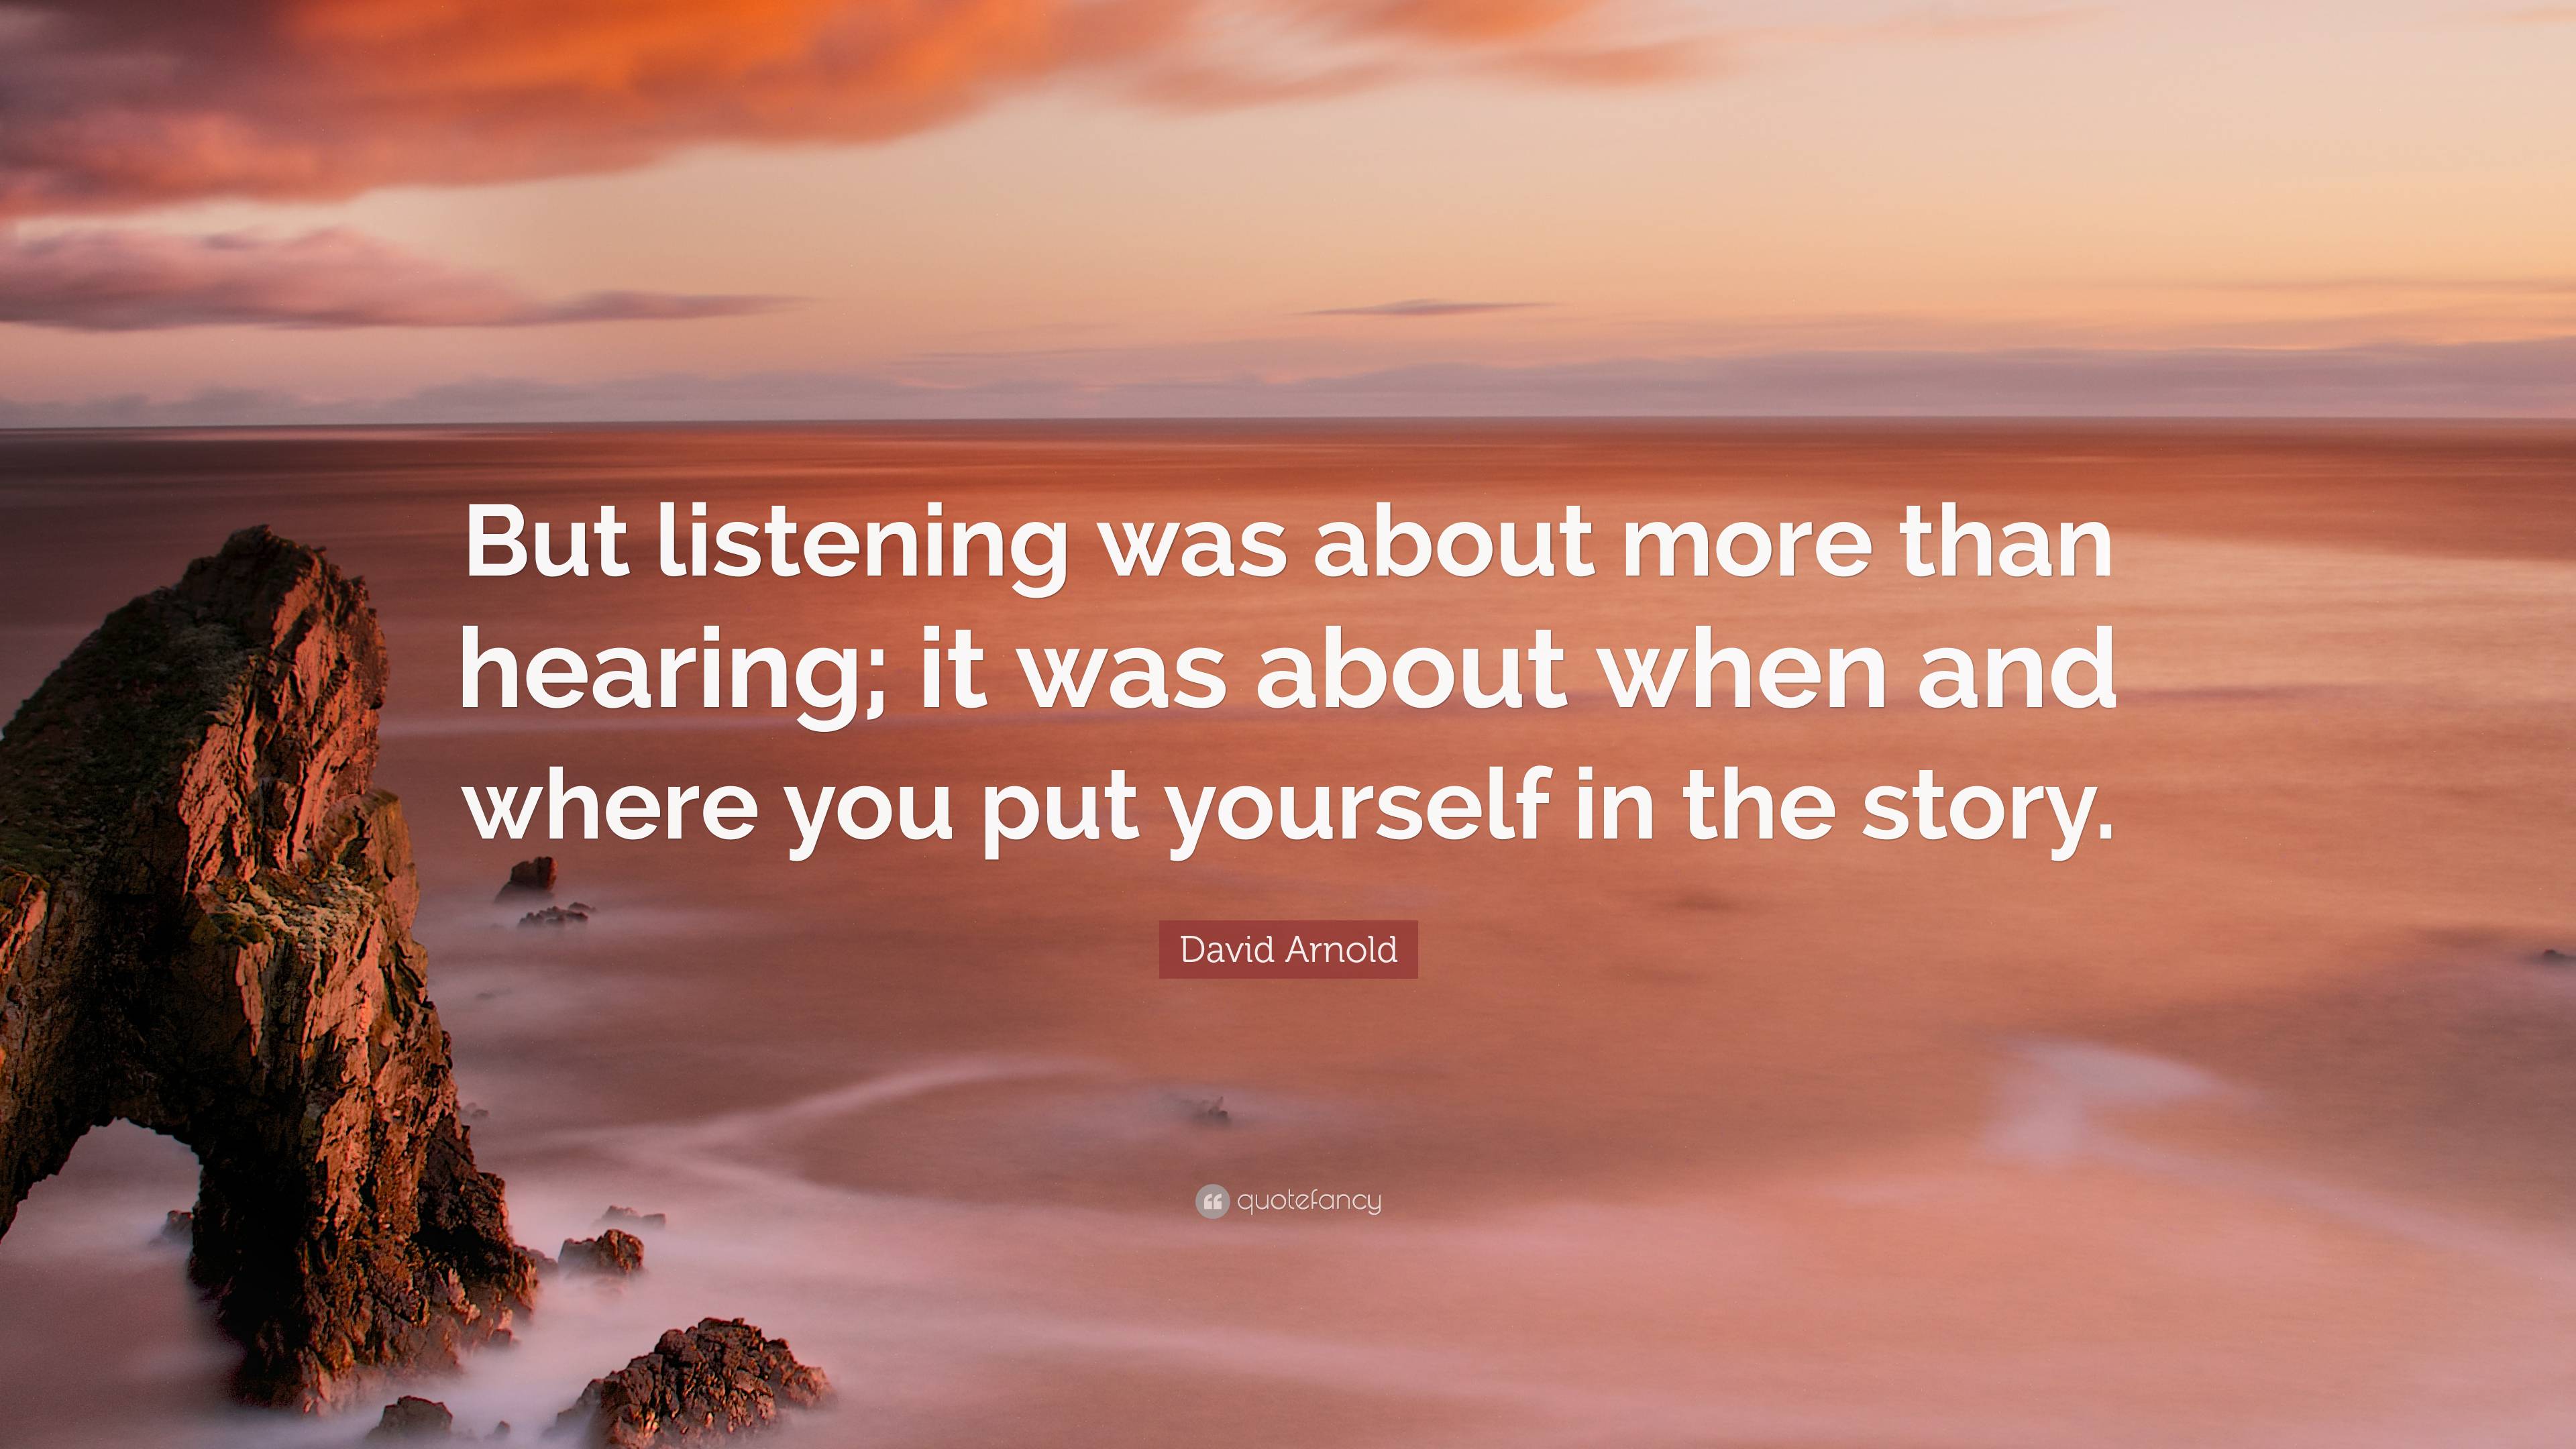 David Arnold Quote: “But listening was about more than hearing; it was ...